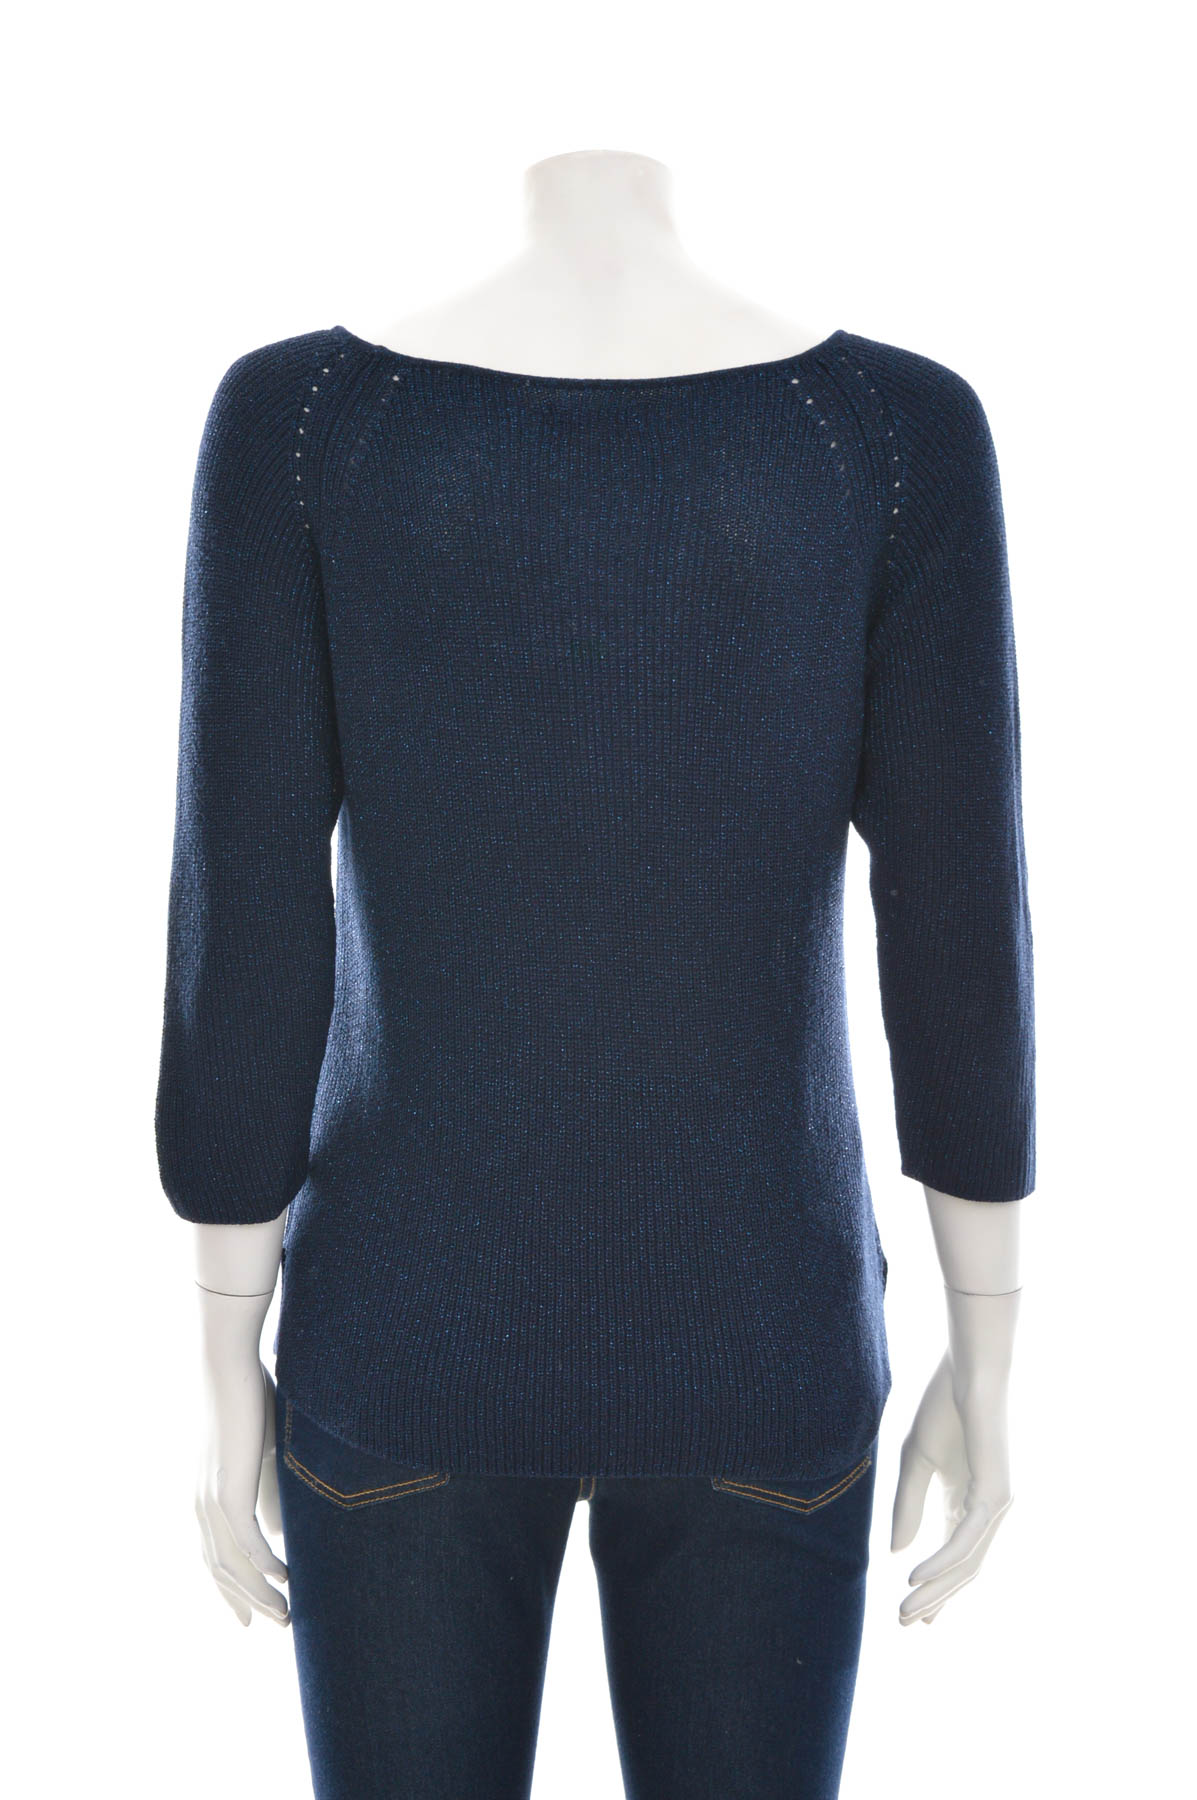 Women's sweater - RESERVED - 1